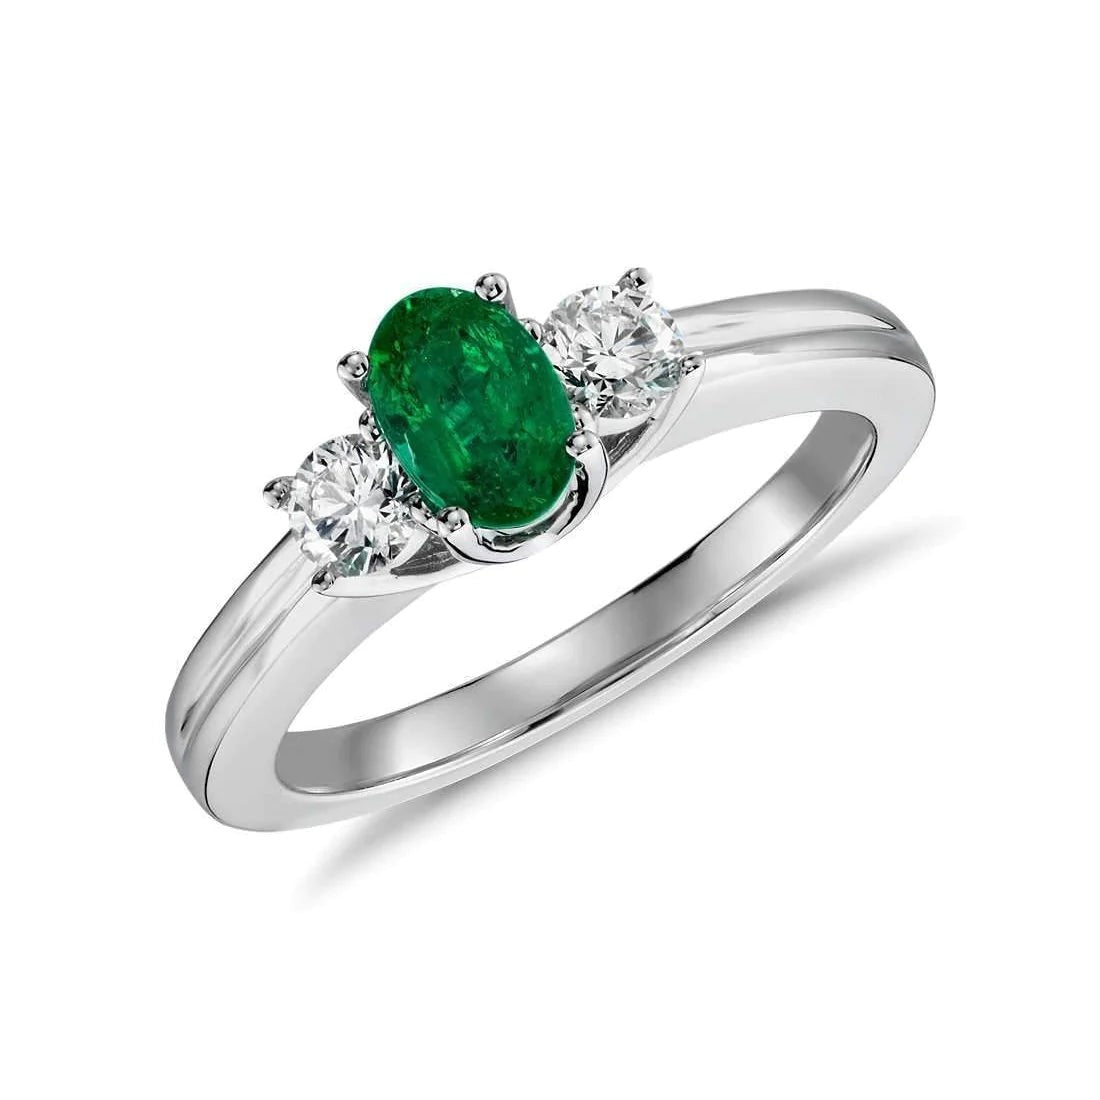 Green Emerald With Diamond Engagement Ring 3 Stone Prong Set 2.50 Ct. WG 14K